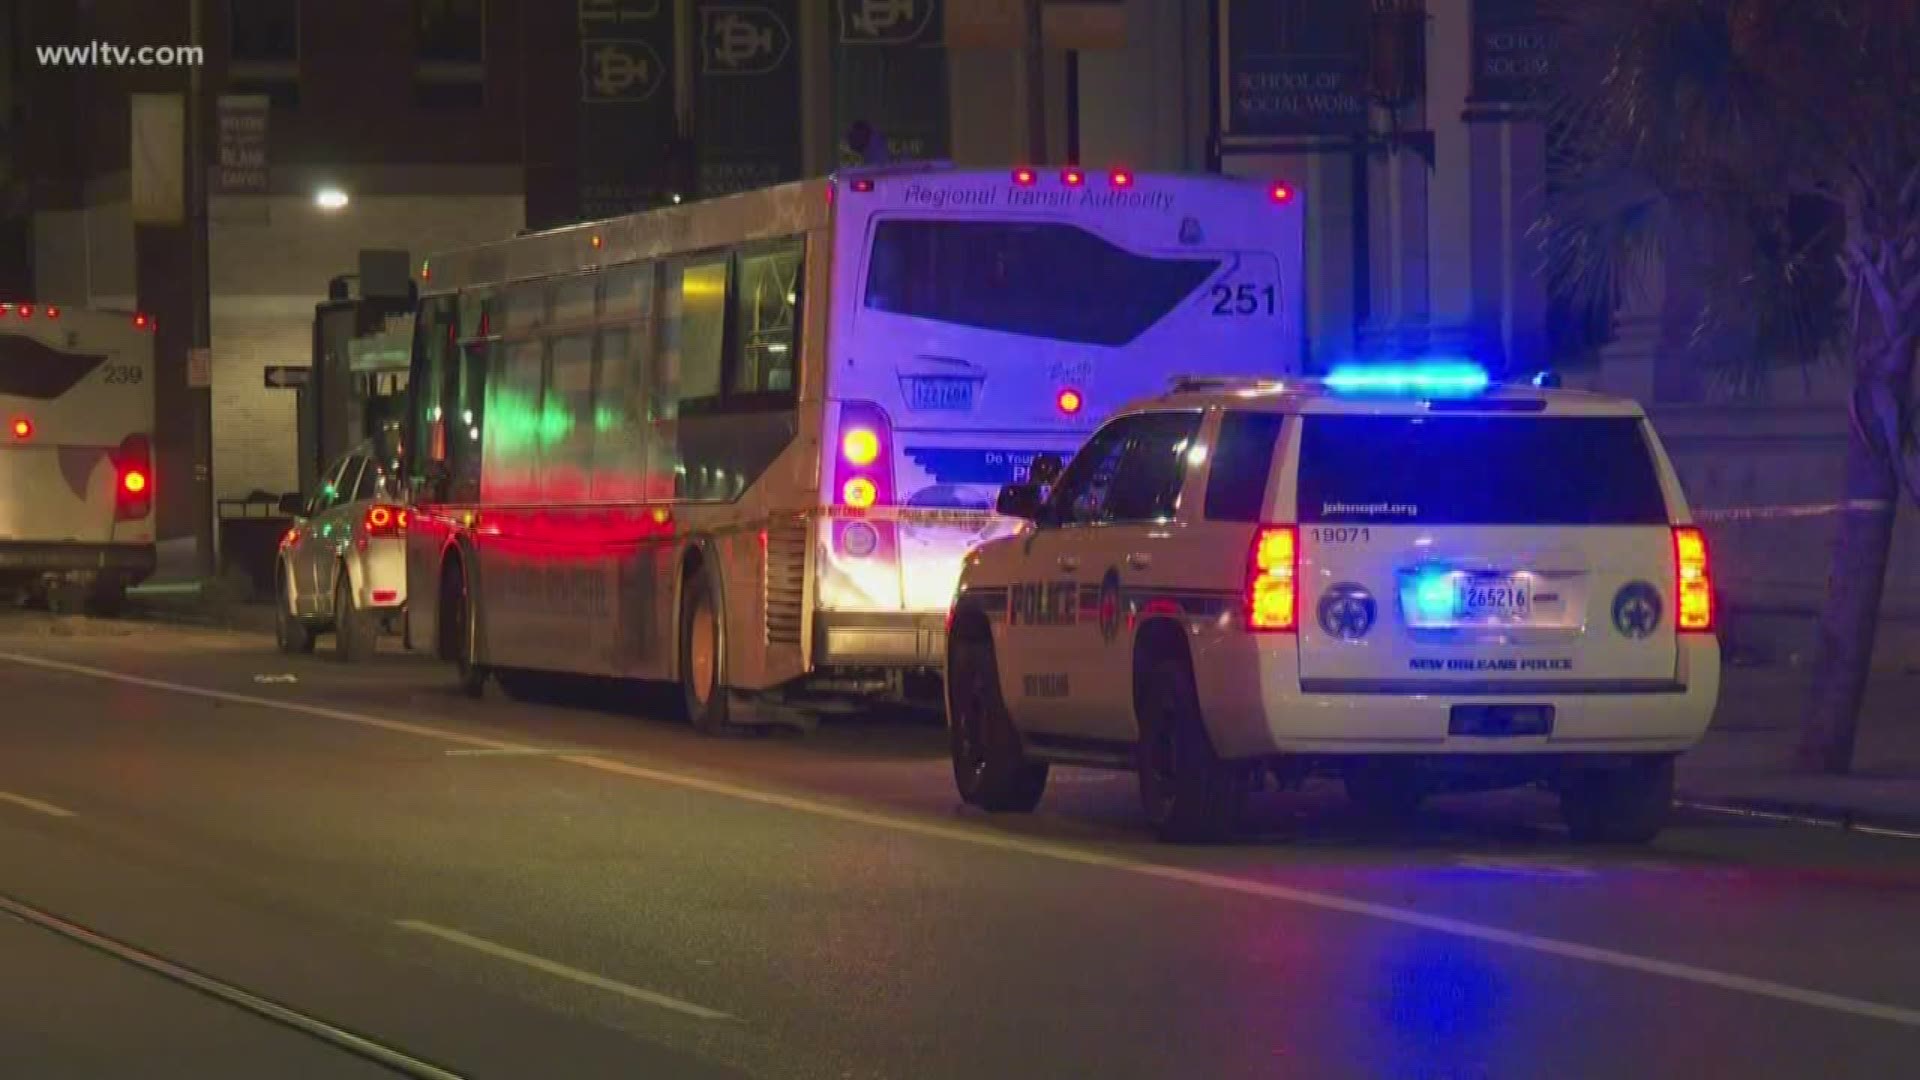 The stabbing took place on a New Orleans Regional Transit Authority bus near the intersection of Canal Street and Elk Place around 4:30 a.m., the New Orleans Police Department confirmed.